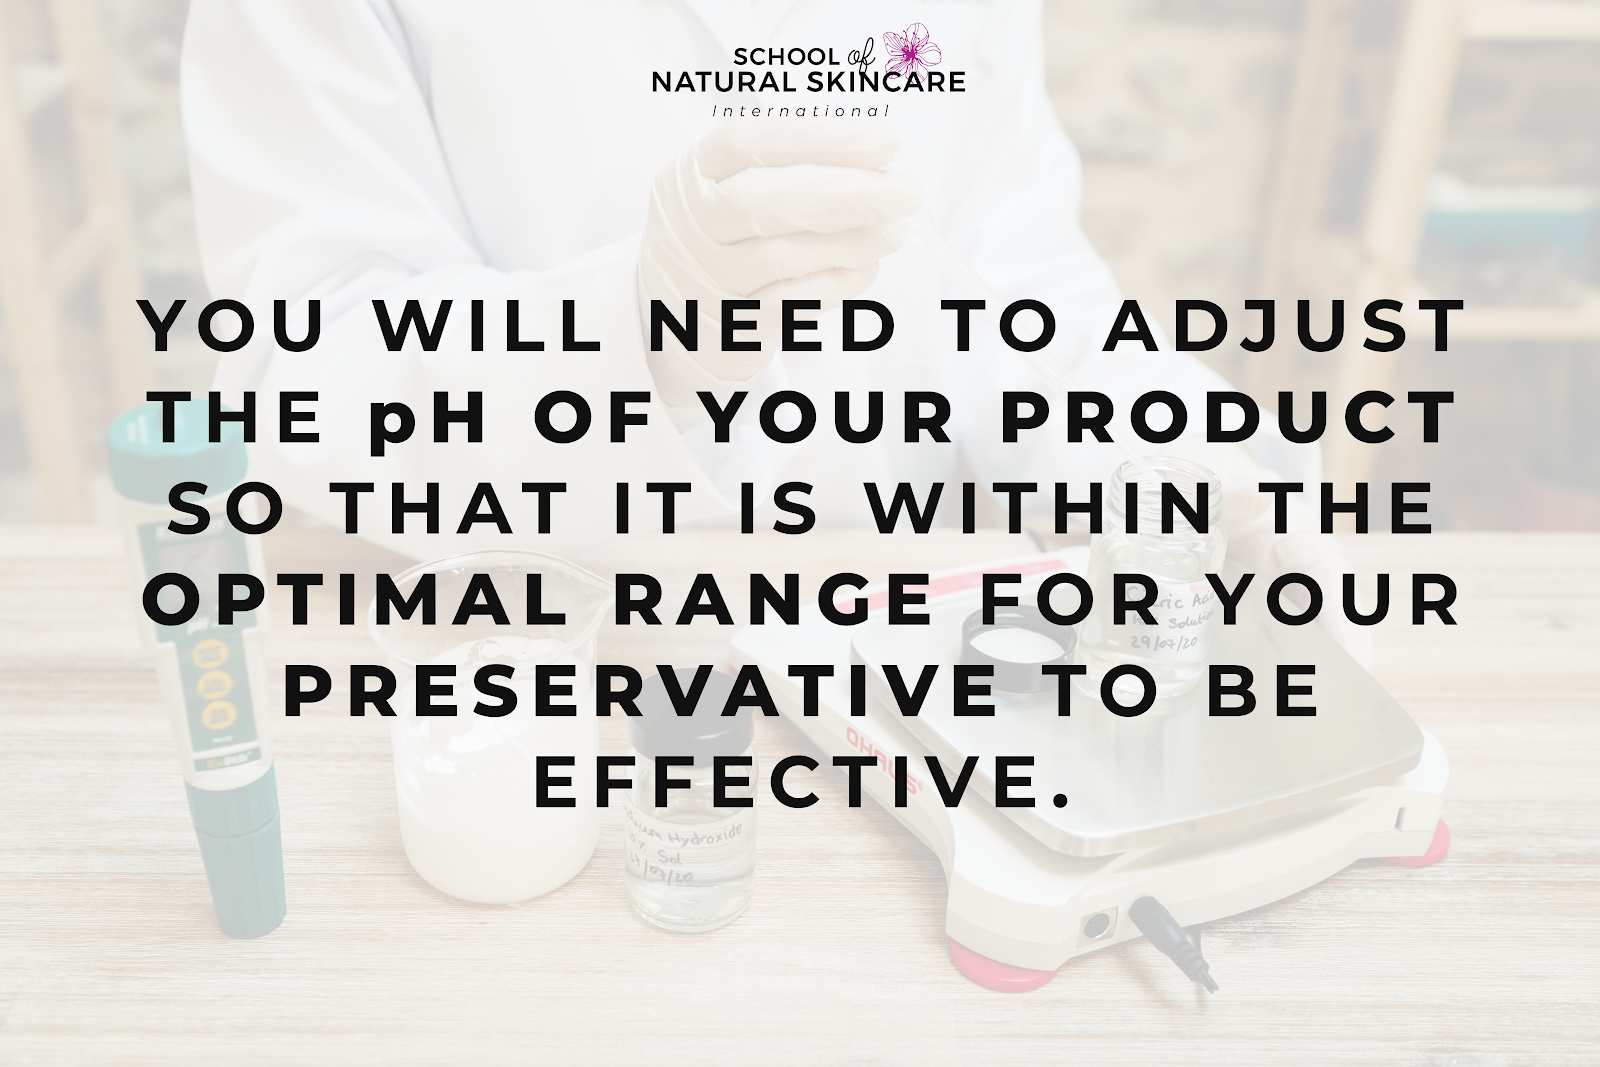 How to test and adjust the pH of natural skincare products (and why you should) Skincare Formulation 